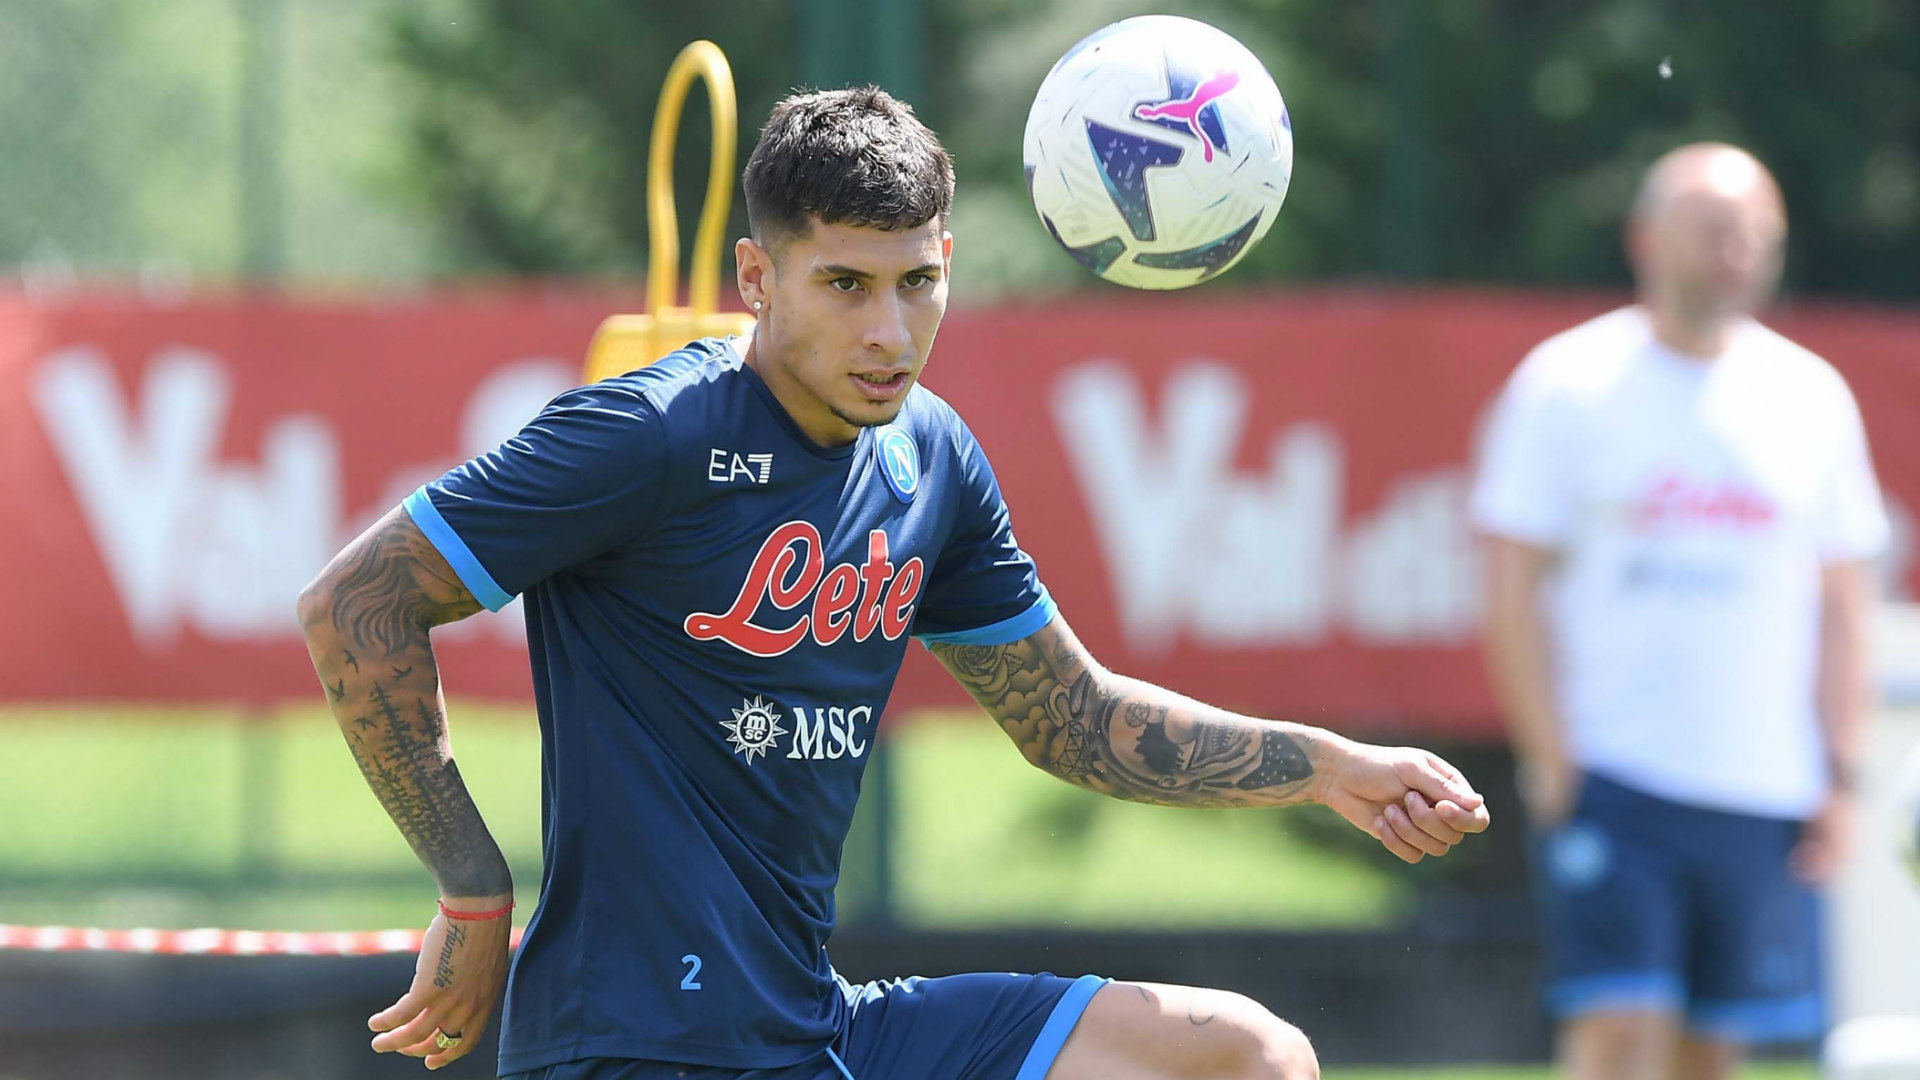 Napoli has lost another left-back to injury, Mathias Olivera, but they remain unlikely to turn to the free-agent pool to replenish the position.